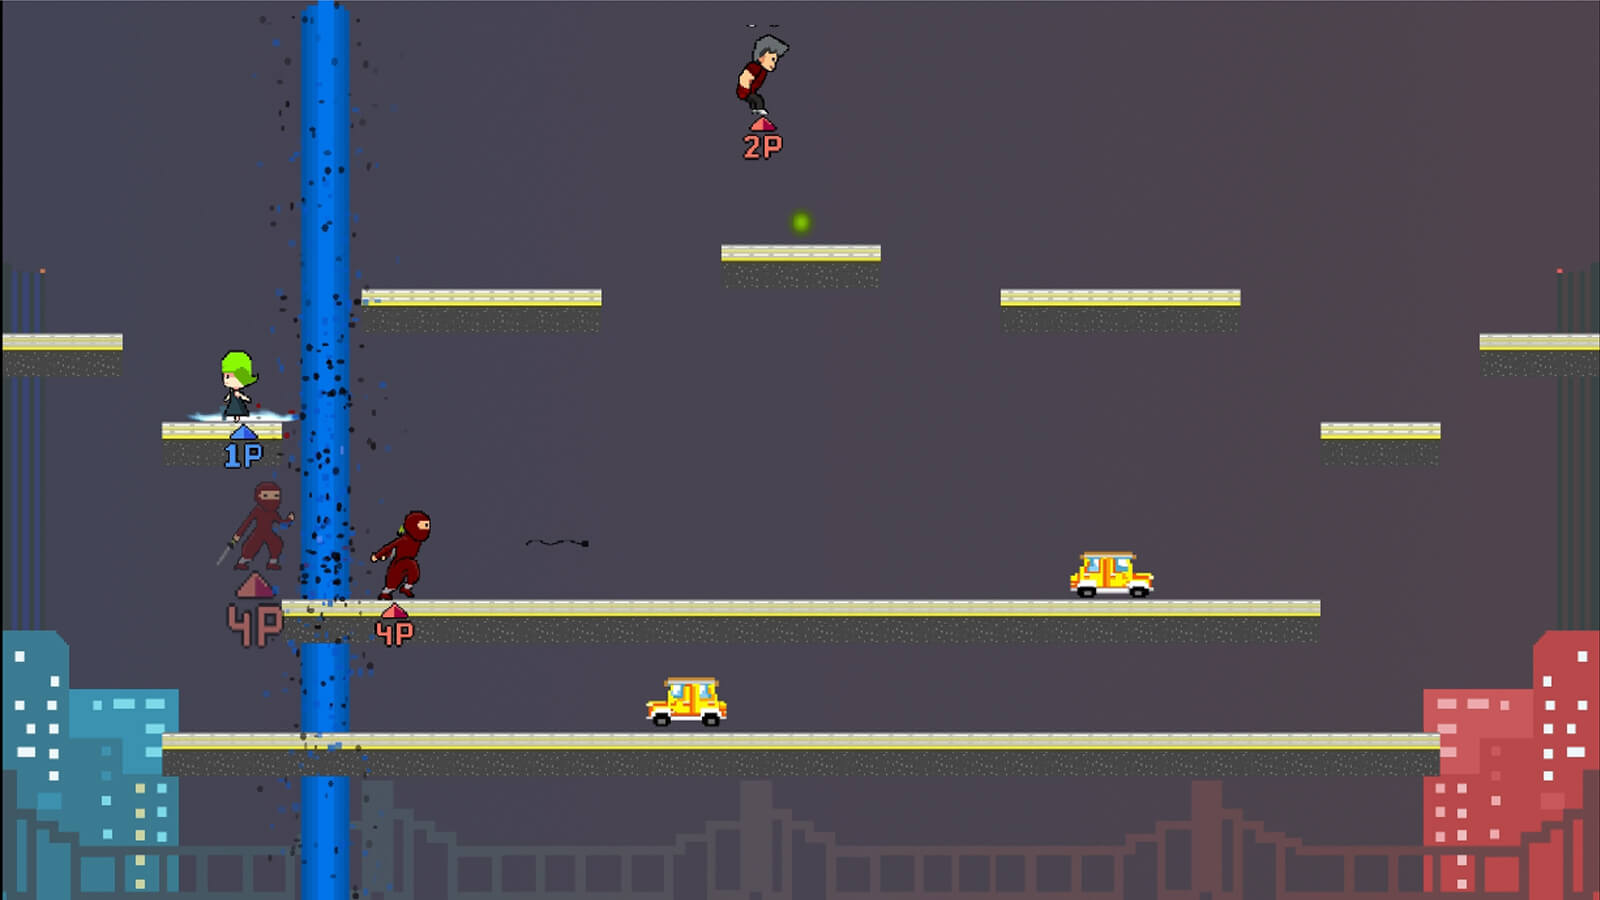 Four players jump around urban-style platforms on a level with a cityscape background